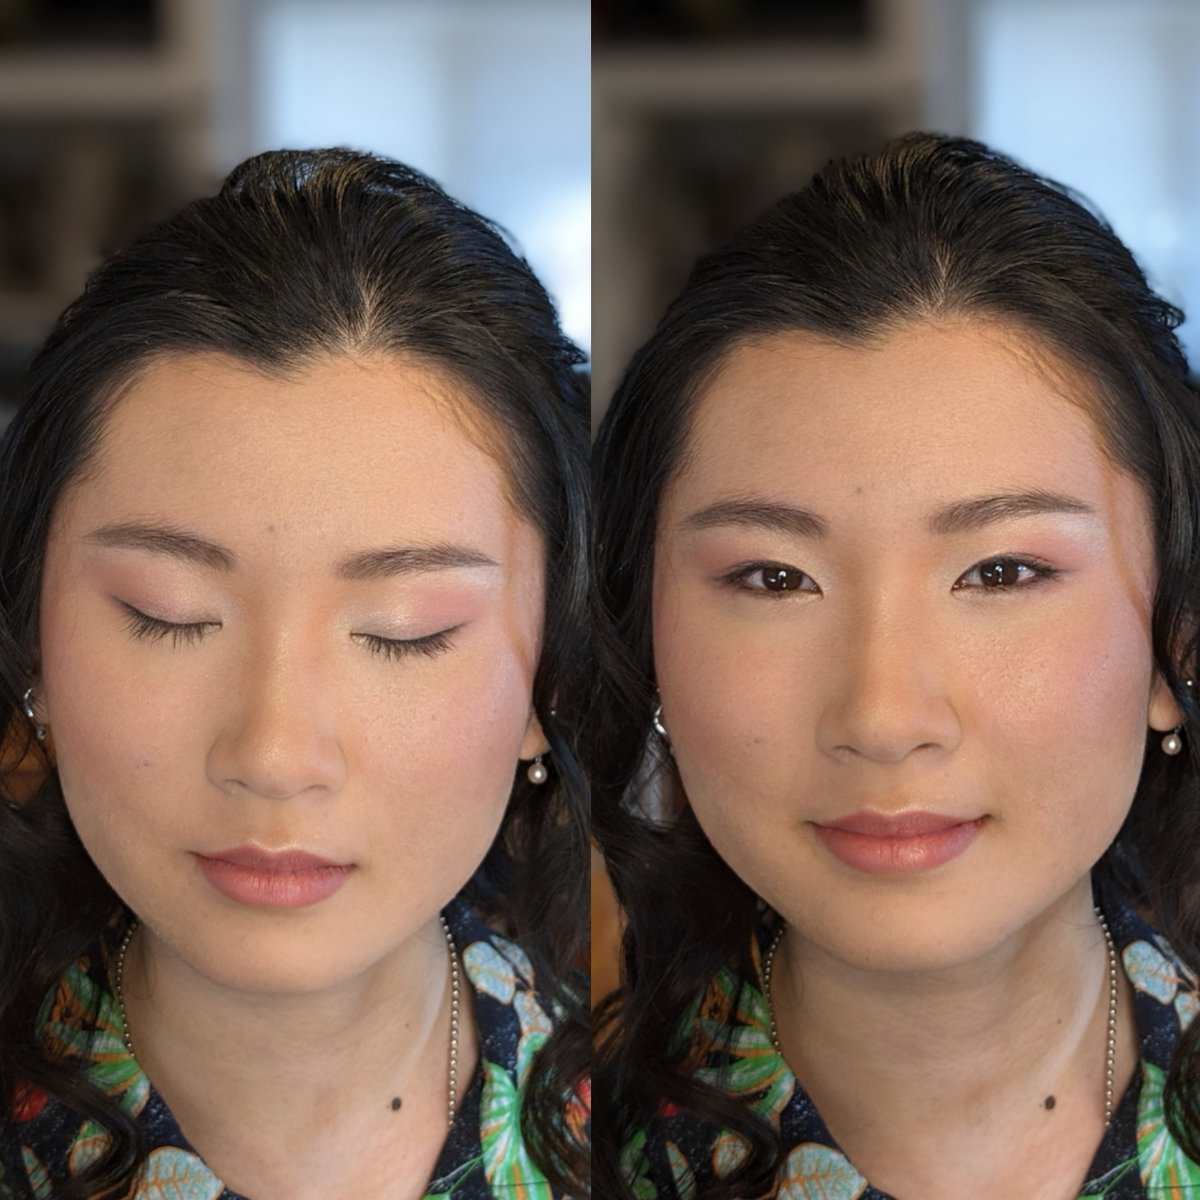 Natural bridal makeup for a soft look.  It does not have to be heavy to be gorgeous. 
#weddingmakeupinspo#naturalglambridalmakeup
#softglambridalmakeup#softglammakeup
#naturalbridalmakeup#asianweddingmakeup #asianbridalmakeup#beyourbestself#bridalinspo#beautifulbride #realbride